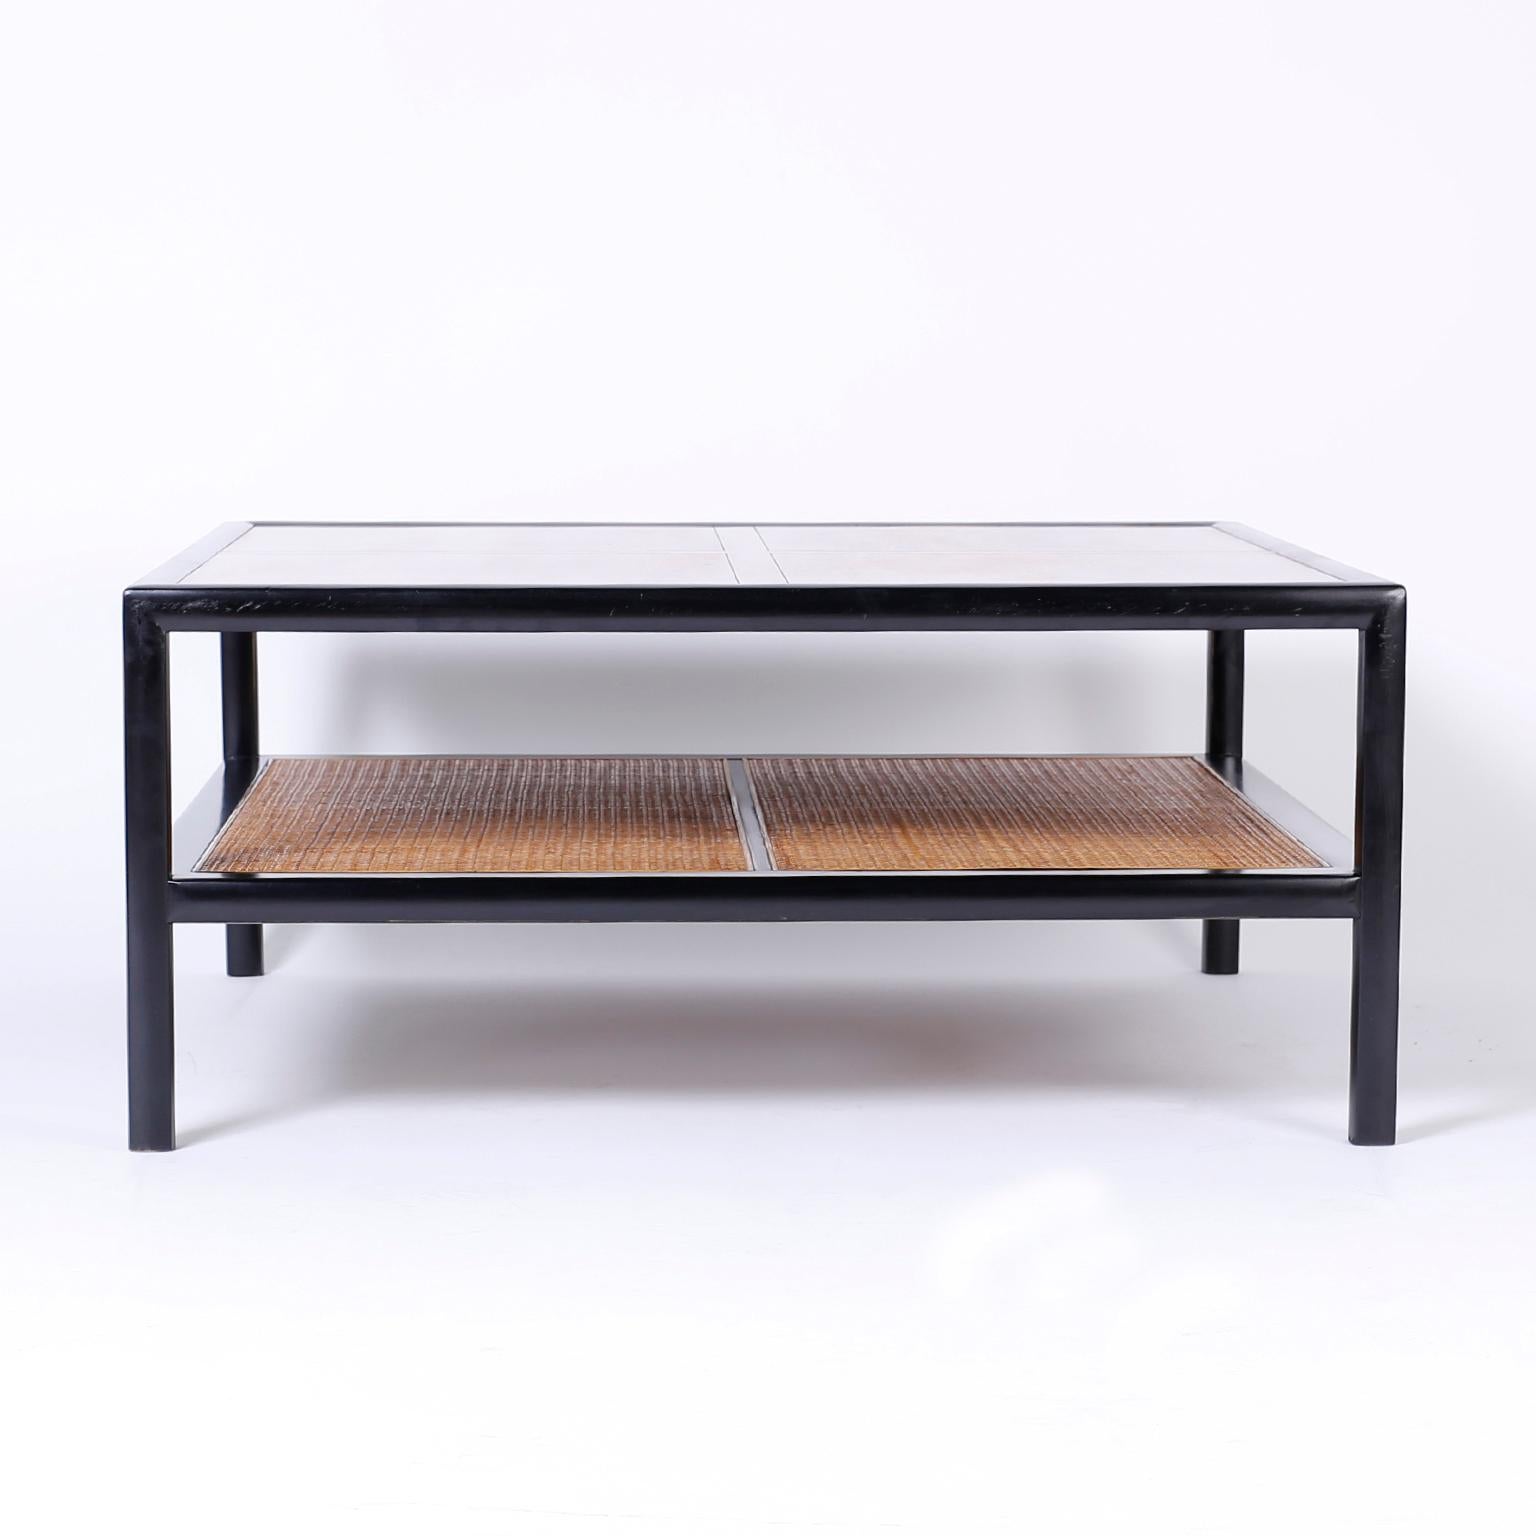 Chic Baker, two-tiered coffee or cocktail table with a sleek black lacquer frame, walnut top, and a caned lower plateau that adds a British Colonial influence.